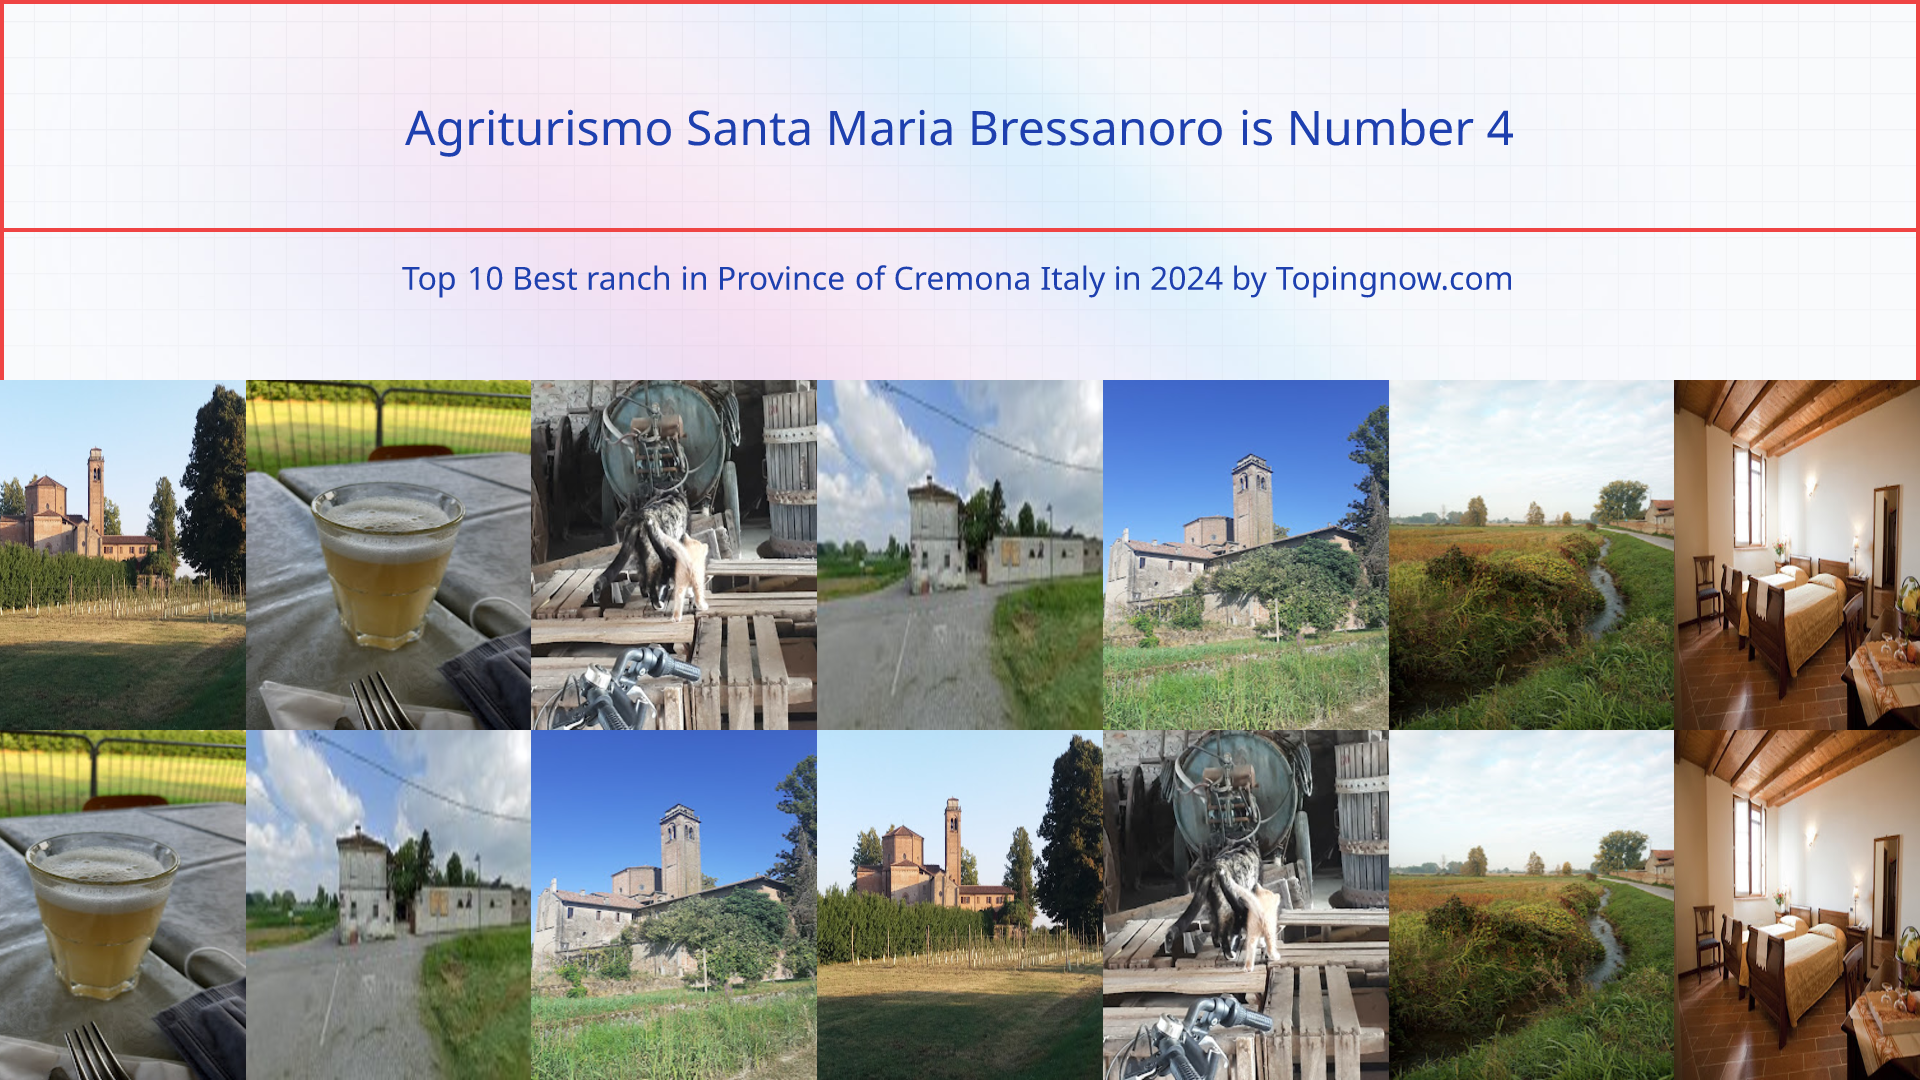 Agriturismo Santa Maria Bressanoro: Top 10 Best ranch in Province of Cremona Italy in 2024